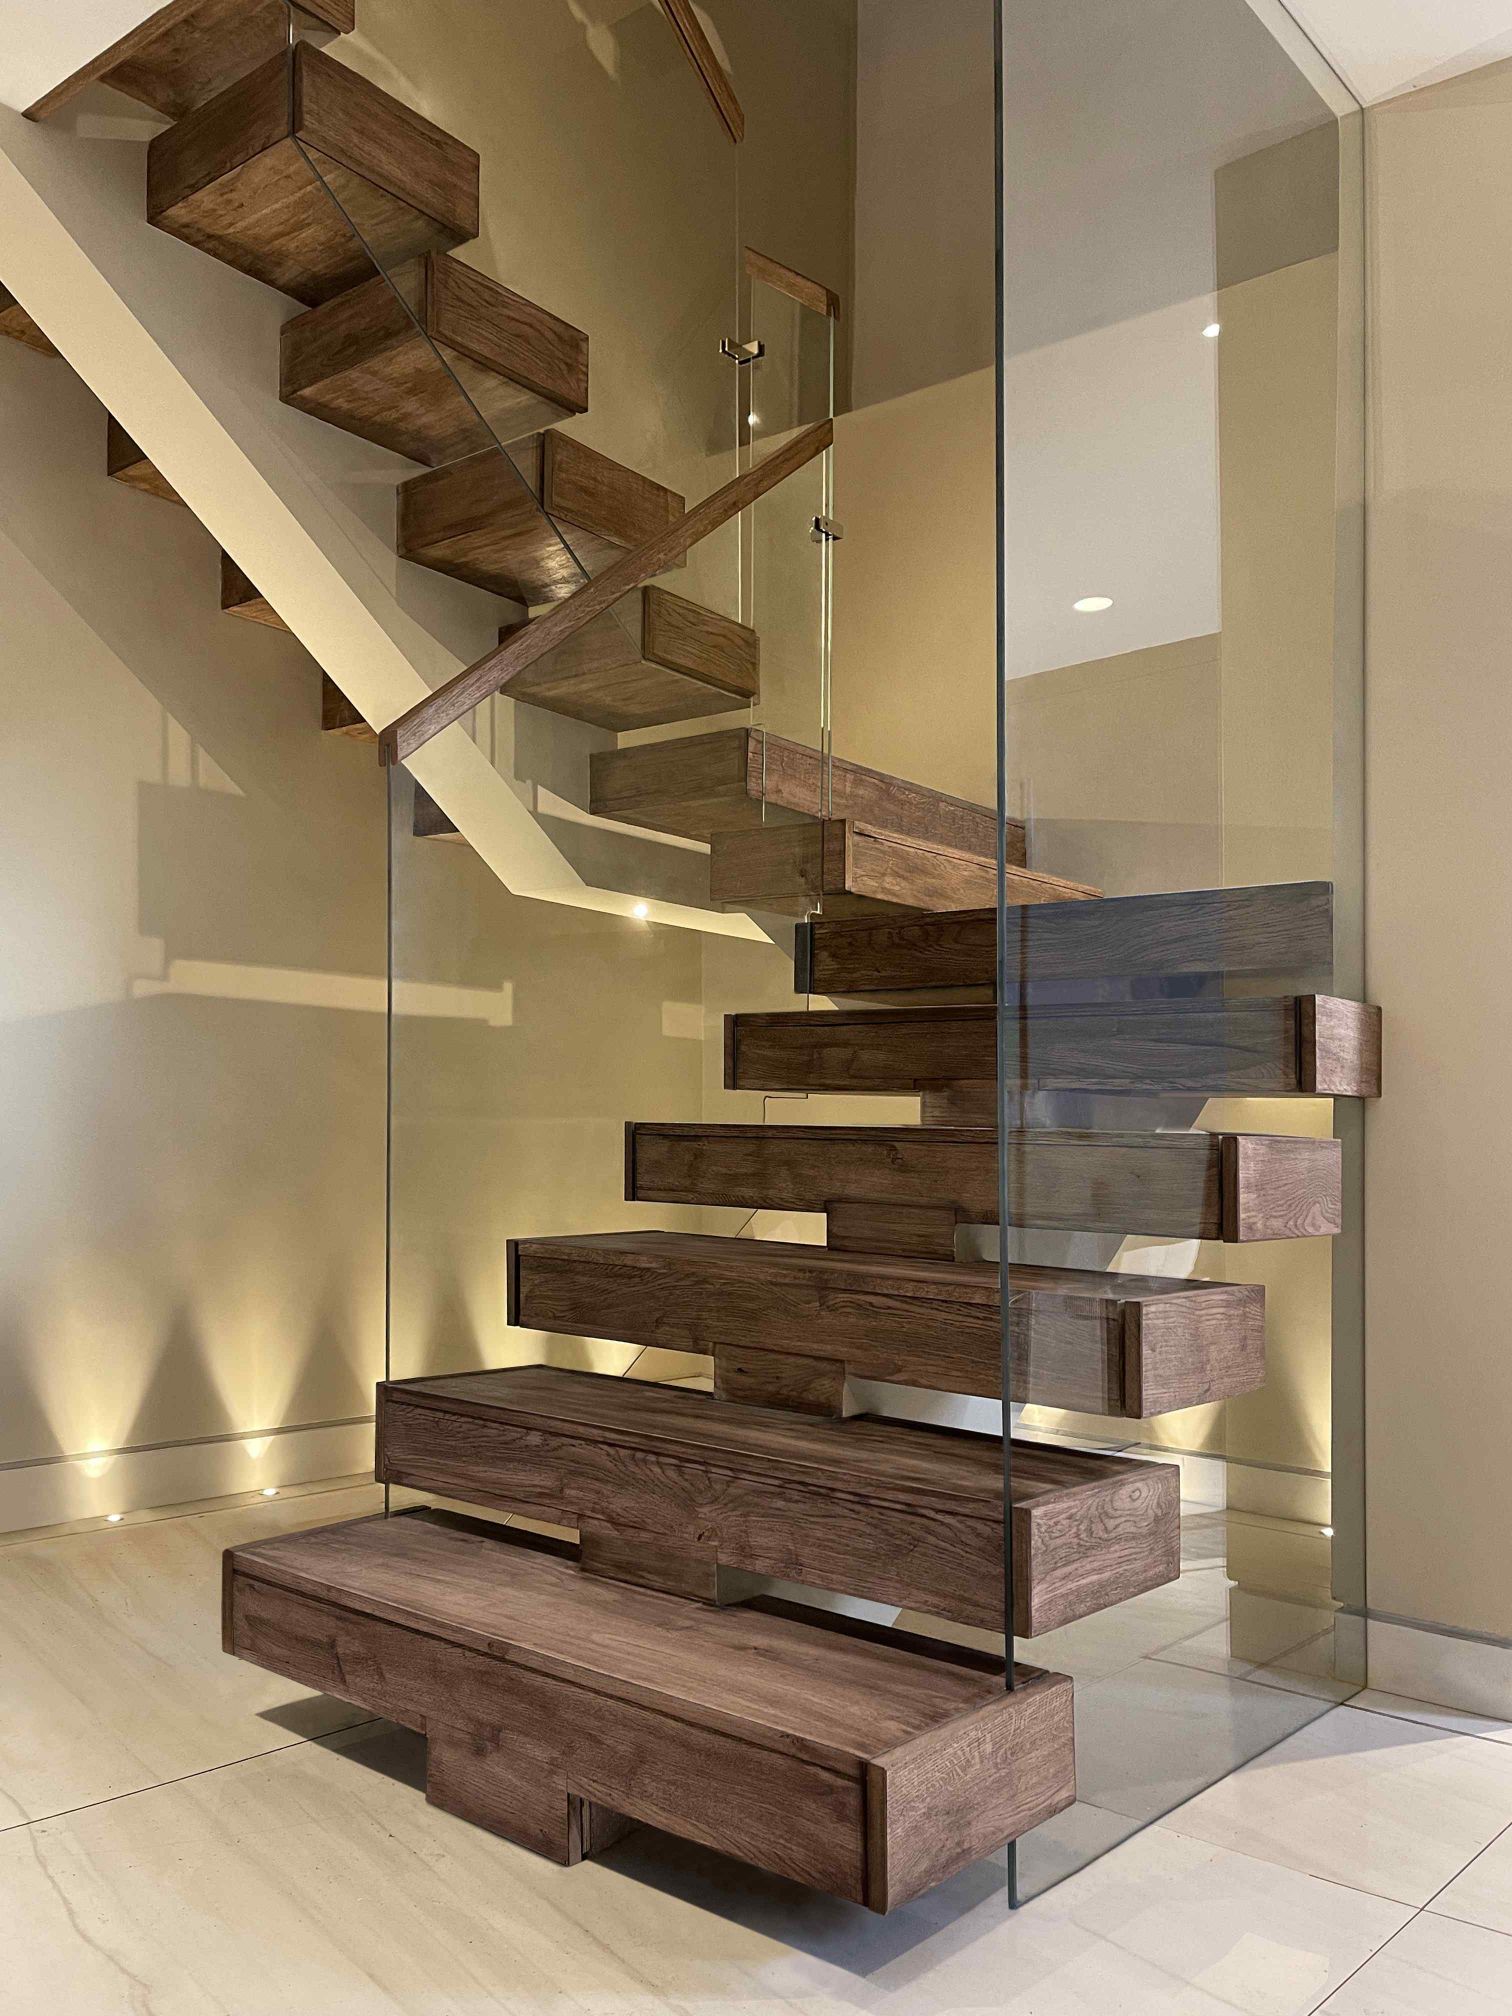 Bespoke spine staircase with Glass balustrade